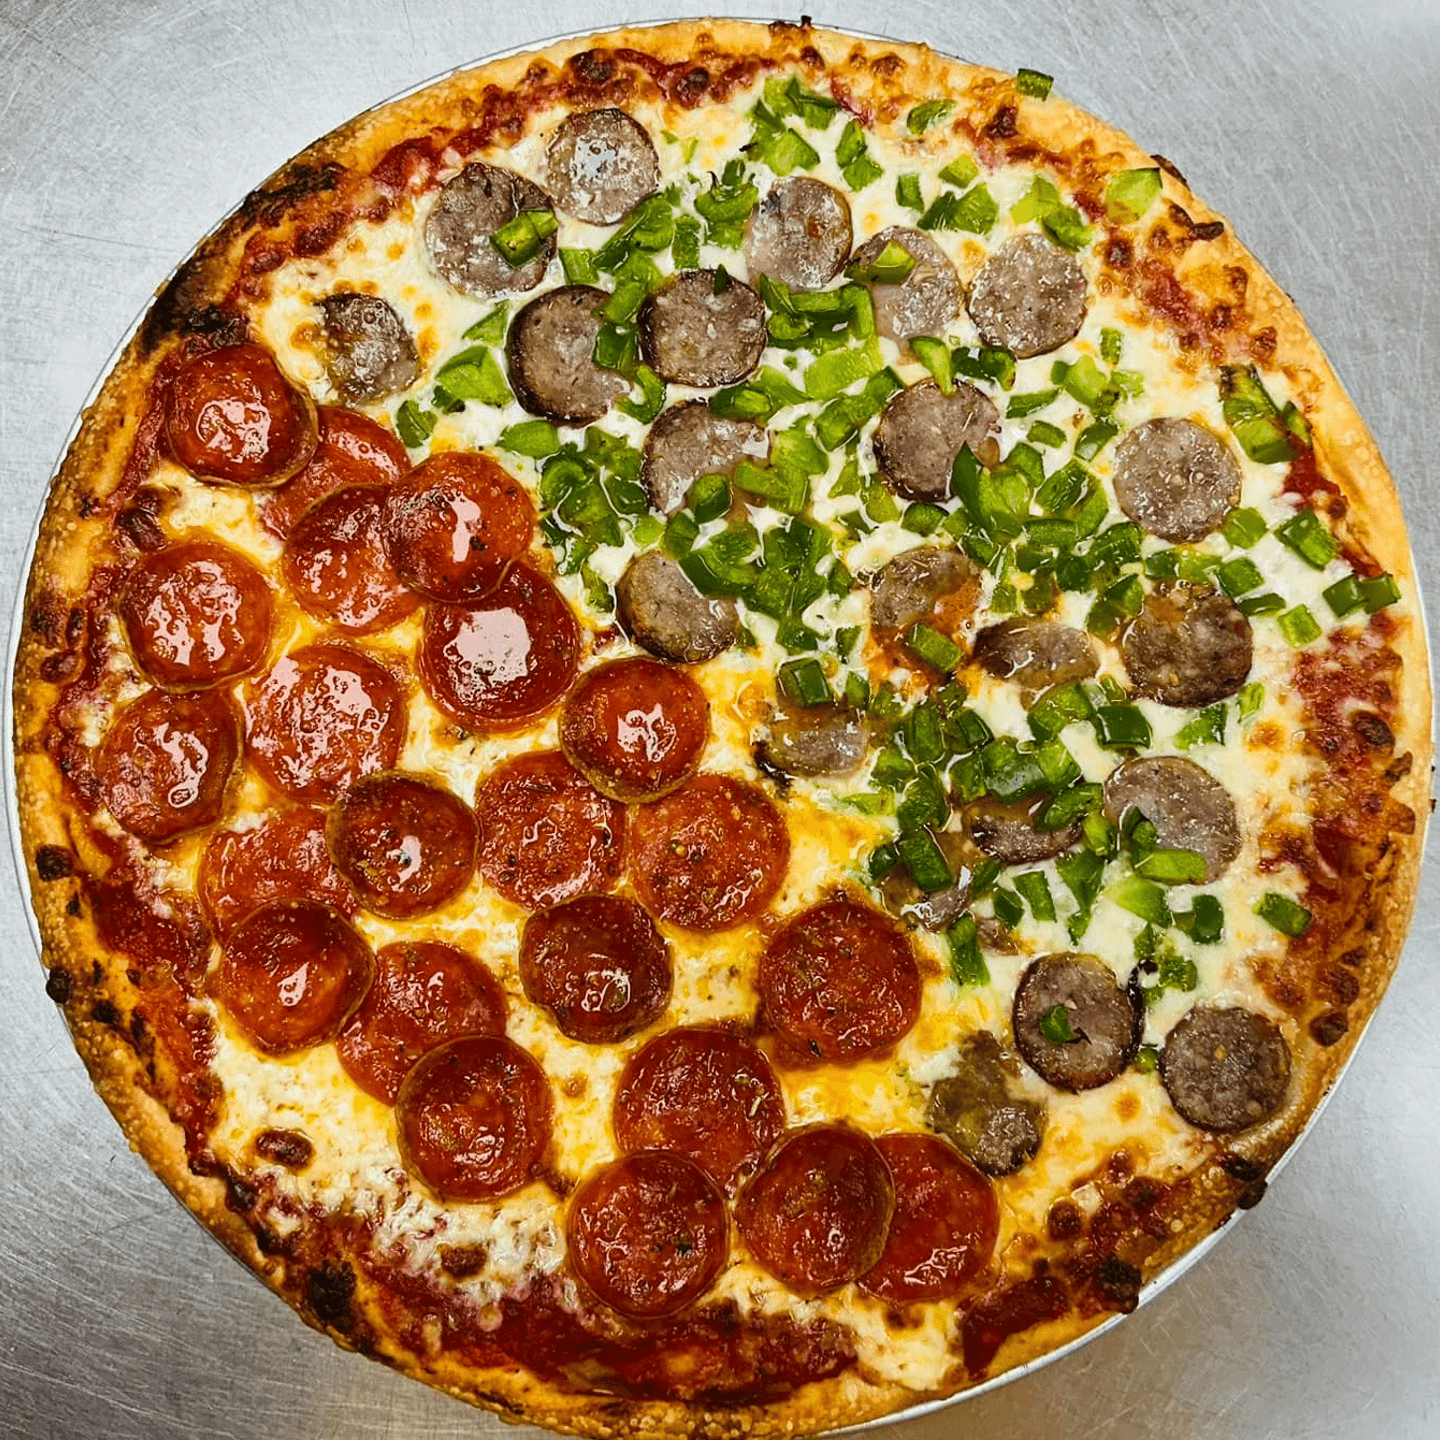 Delivery, Takeout, or Dine-In – Your Choice!